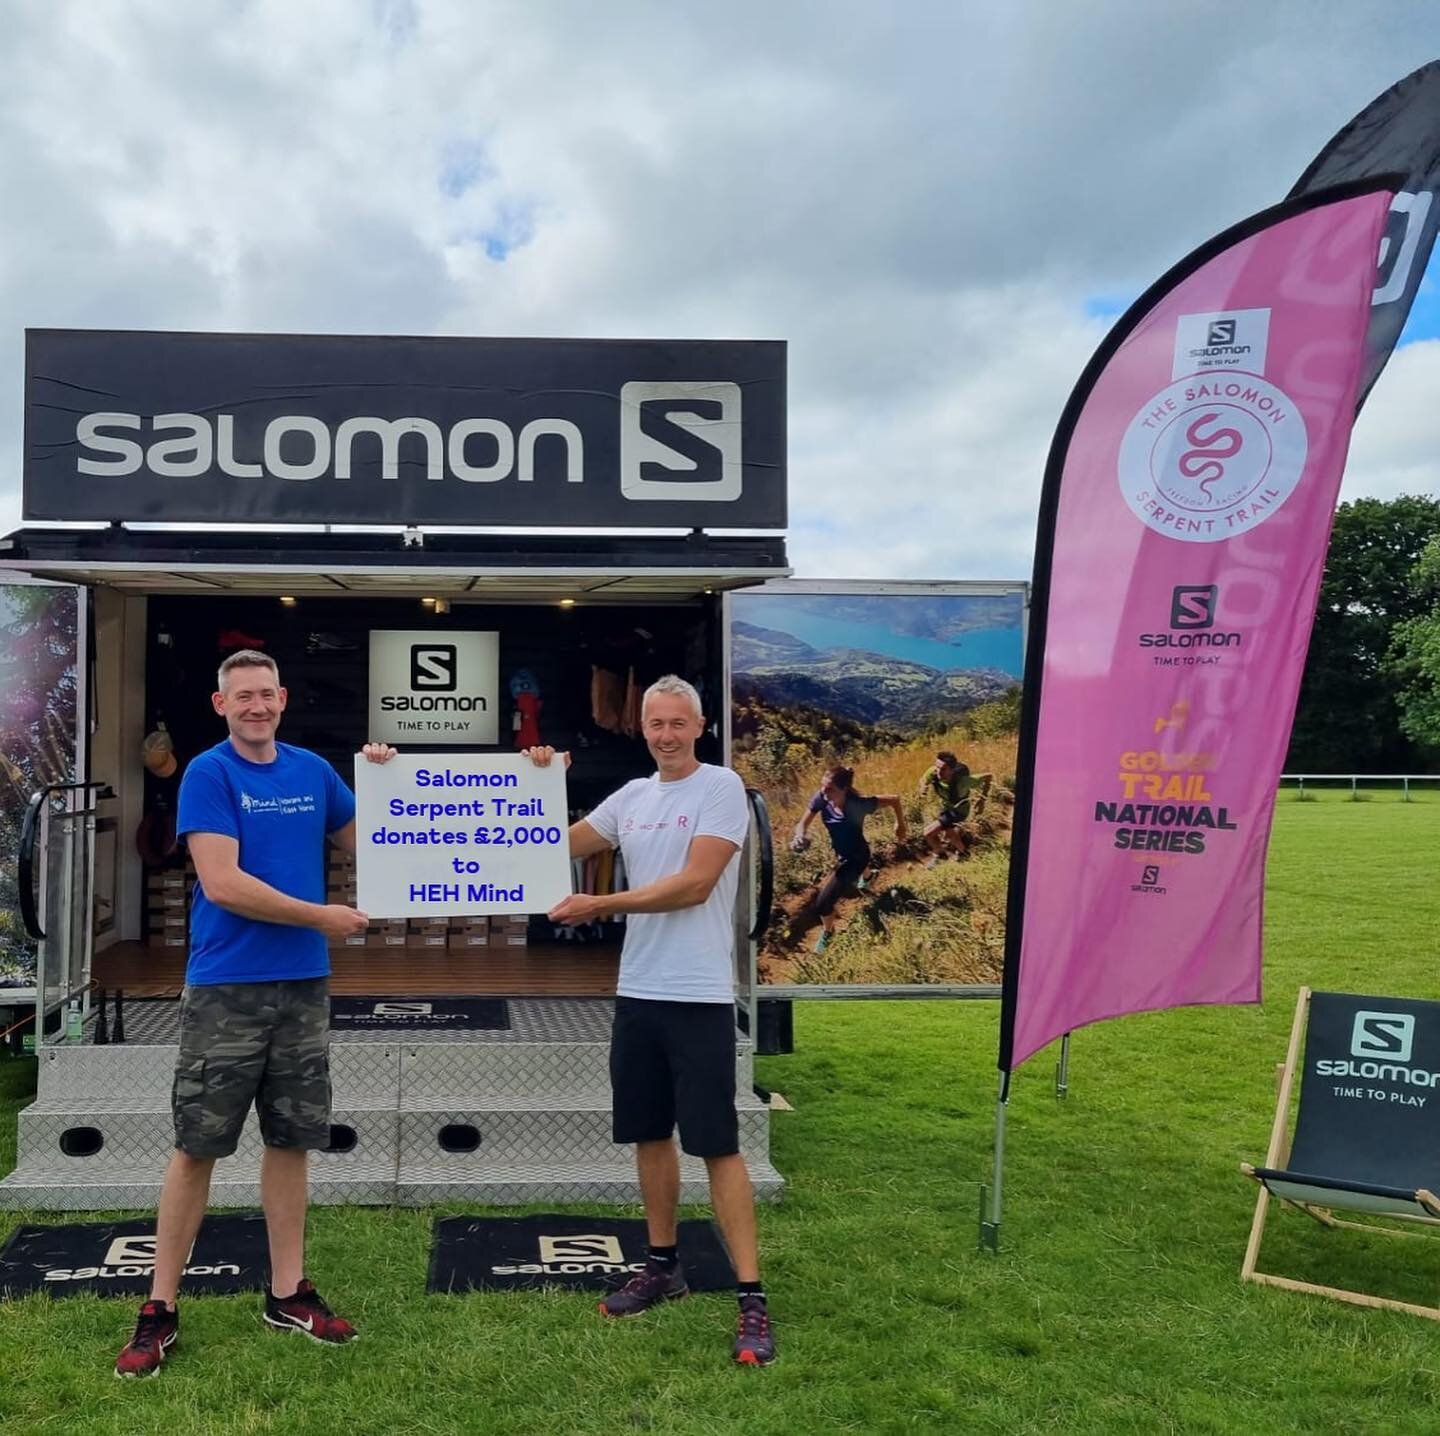 So pleased to have raised &pound;2000 for @heh_mind through the Salomon Serpent Trail!
It was good to have Ross &amp; Mike from the charity at the race so we could chat about the great work and support the charity does. 🙏 
🏃&zwj;♂️🐍🏃&zwj;♀️🐍🏃&z